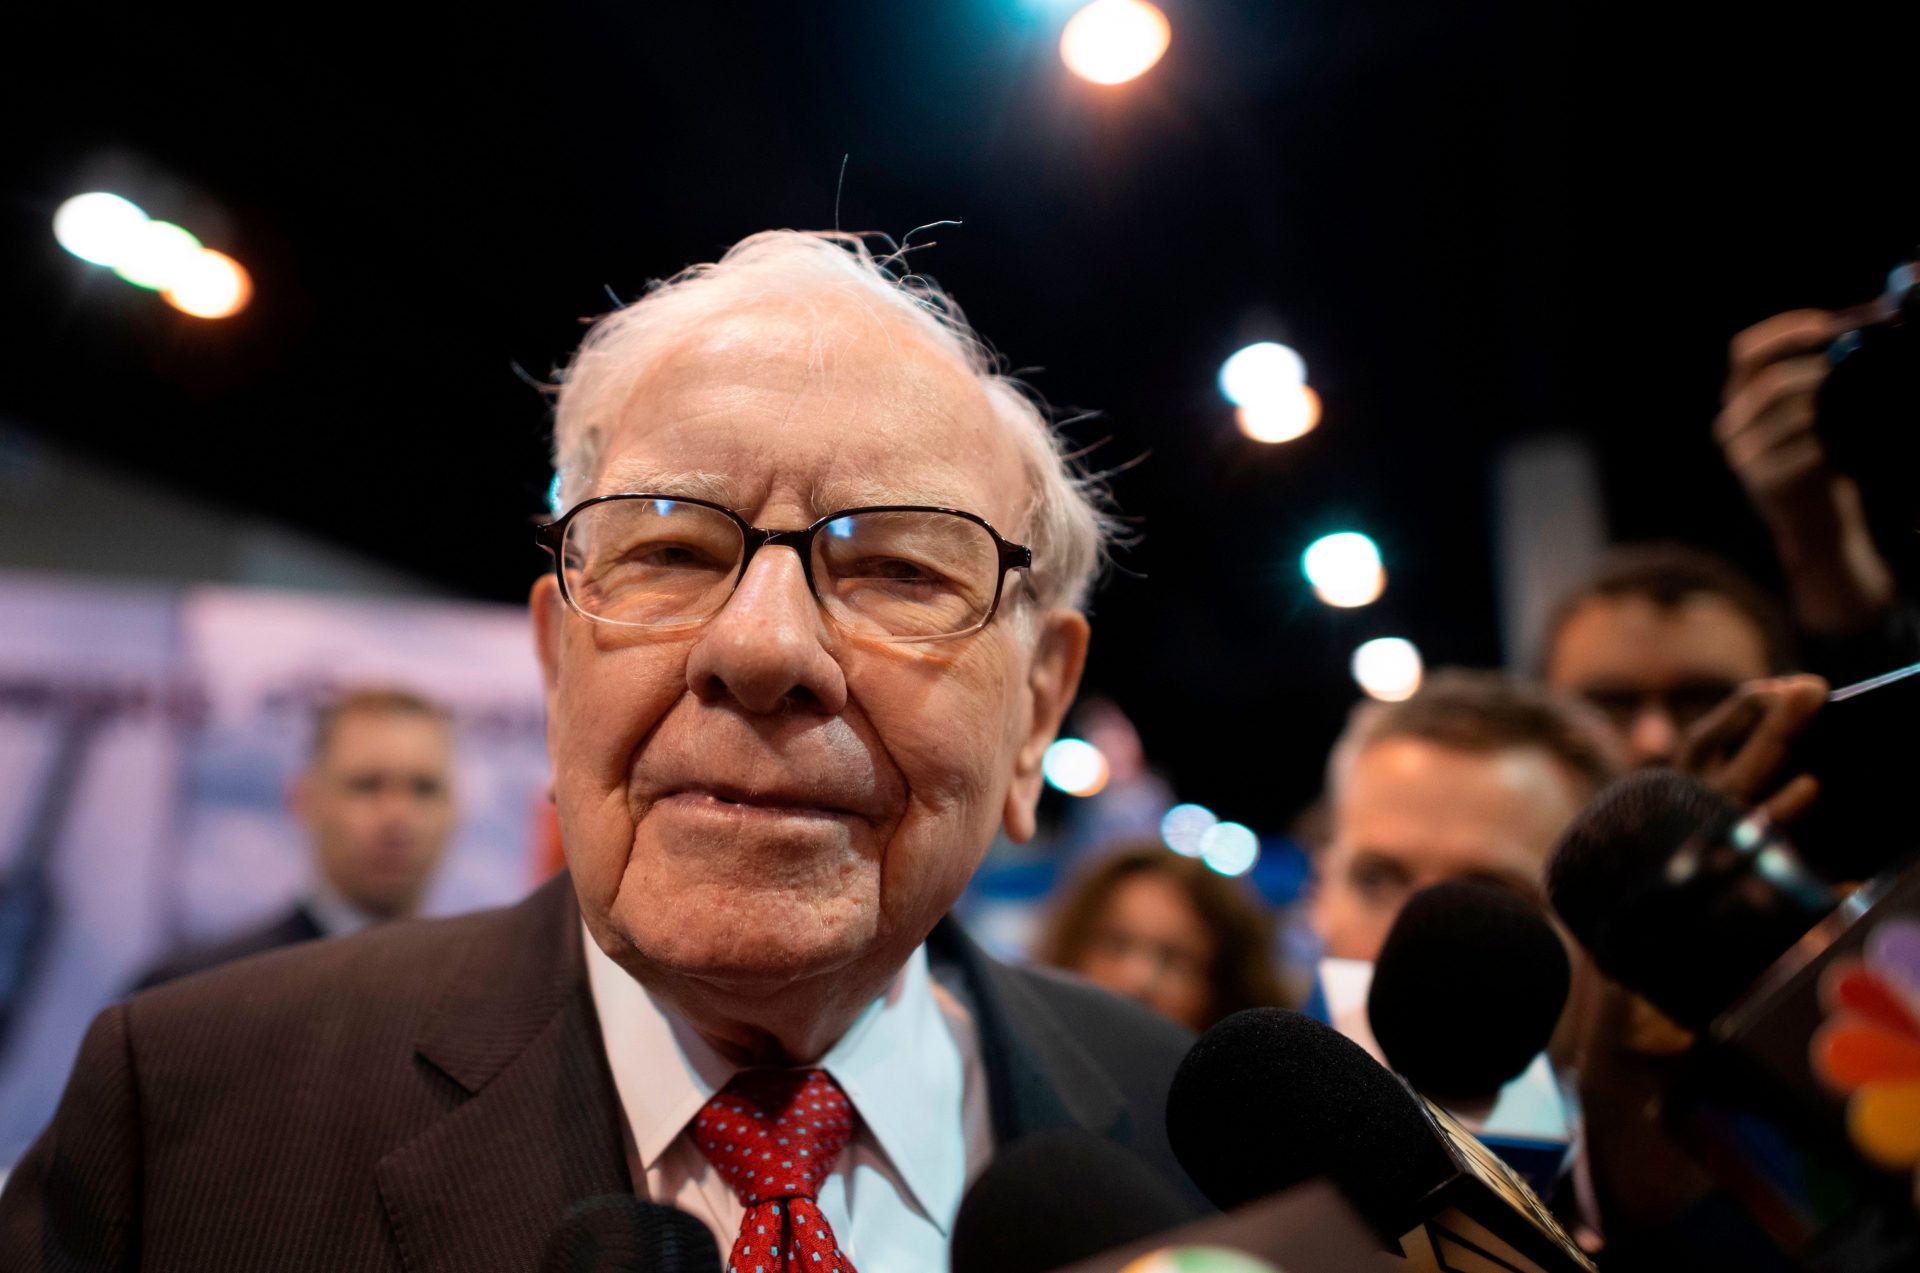 Warren Buffett’s identify-on-fear strategy would possibly perhaps be examined alongside with his most recent bet on fossil fuels